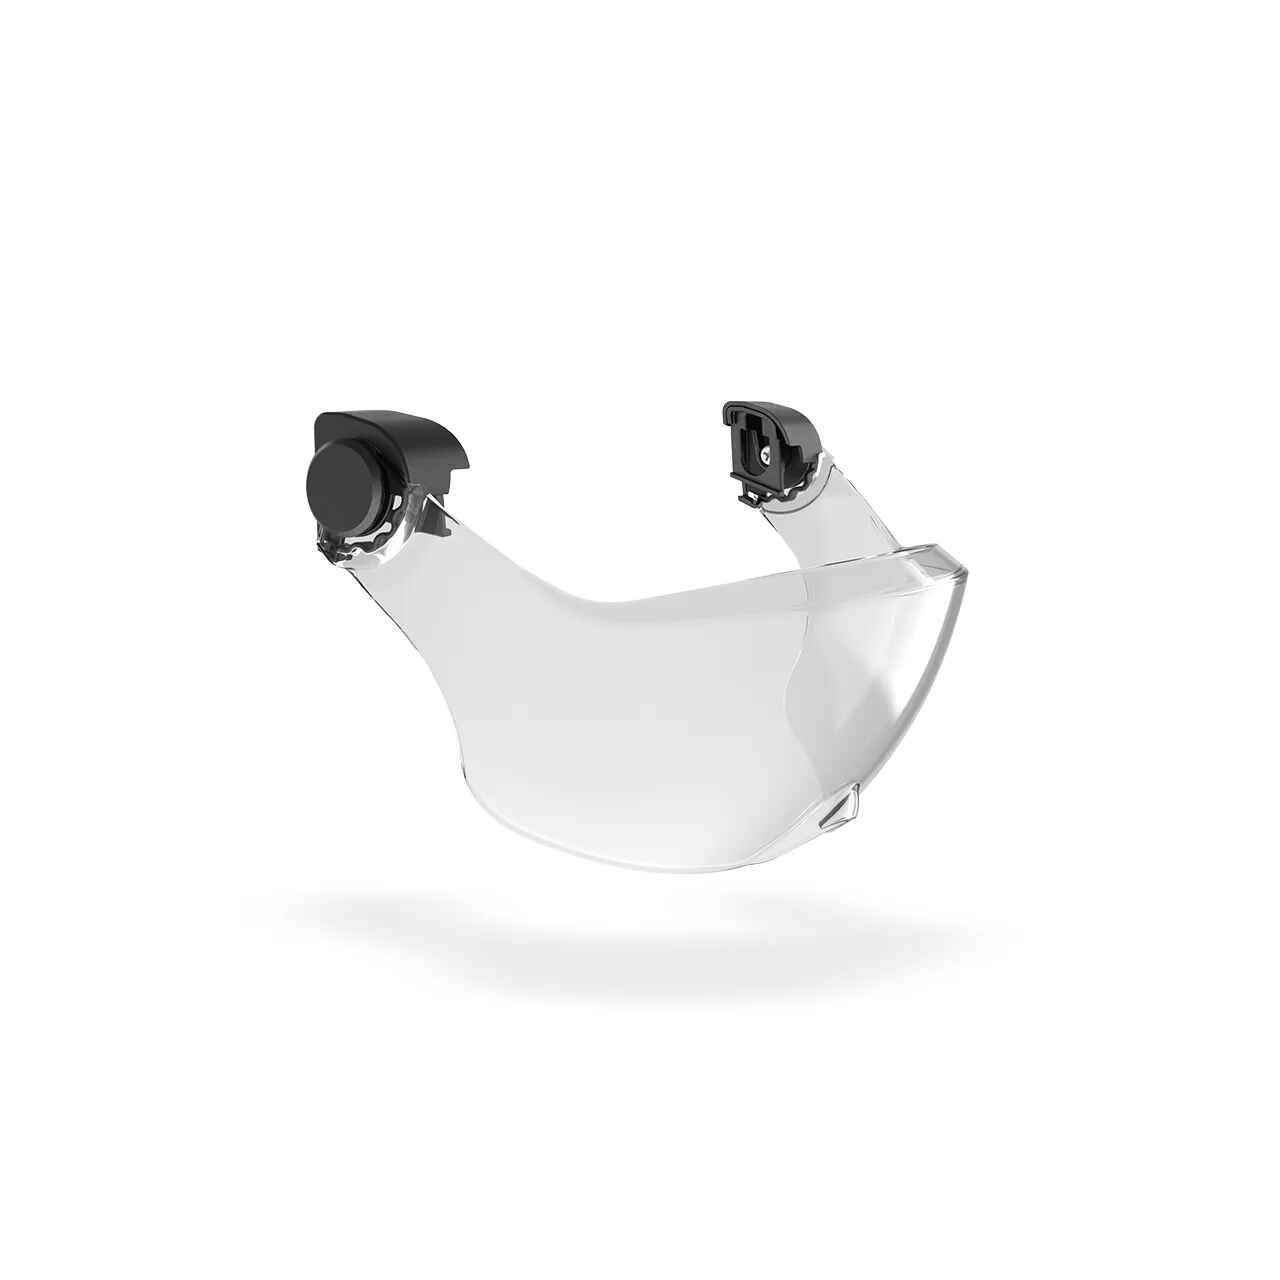 H2 Visor (CLEAR), ANSI Z87+ Rated, Anti-fog and Anti-Scratch - Defender Safety